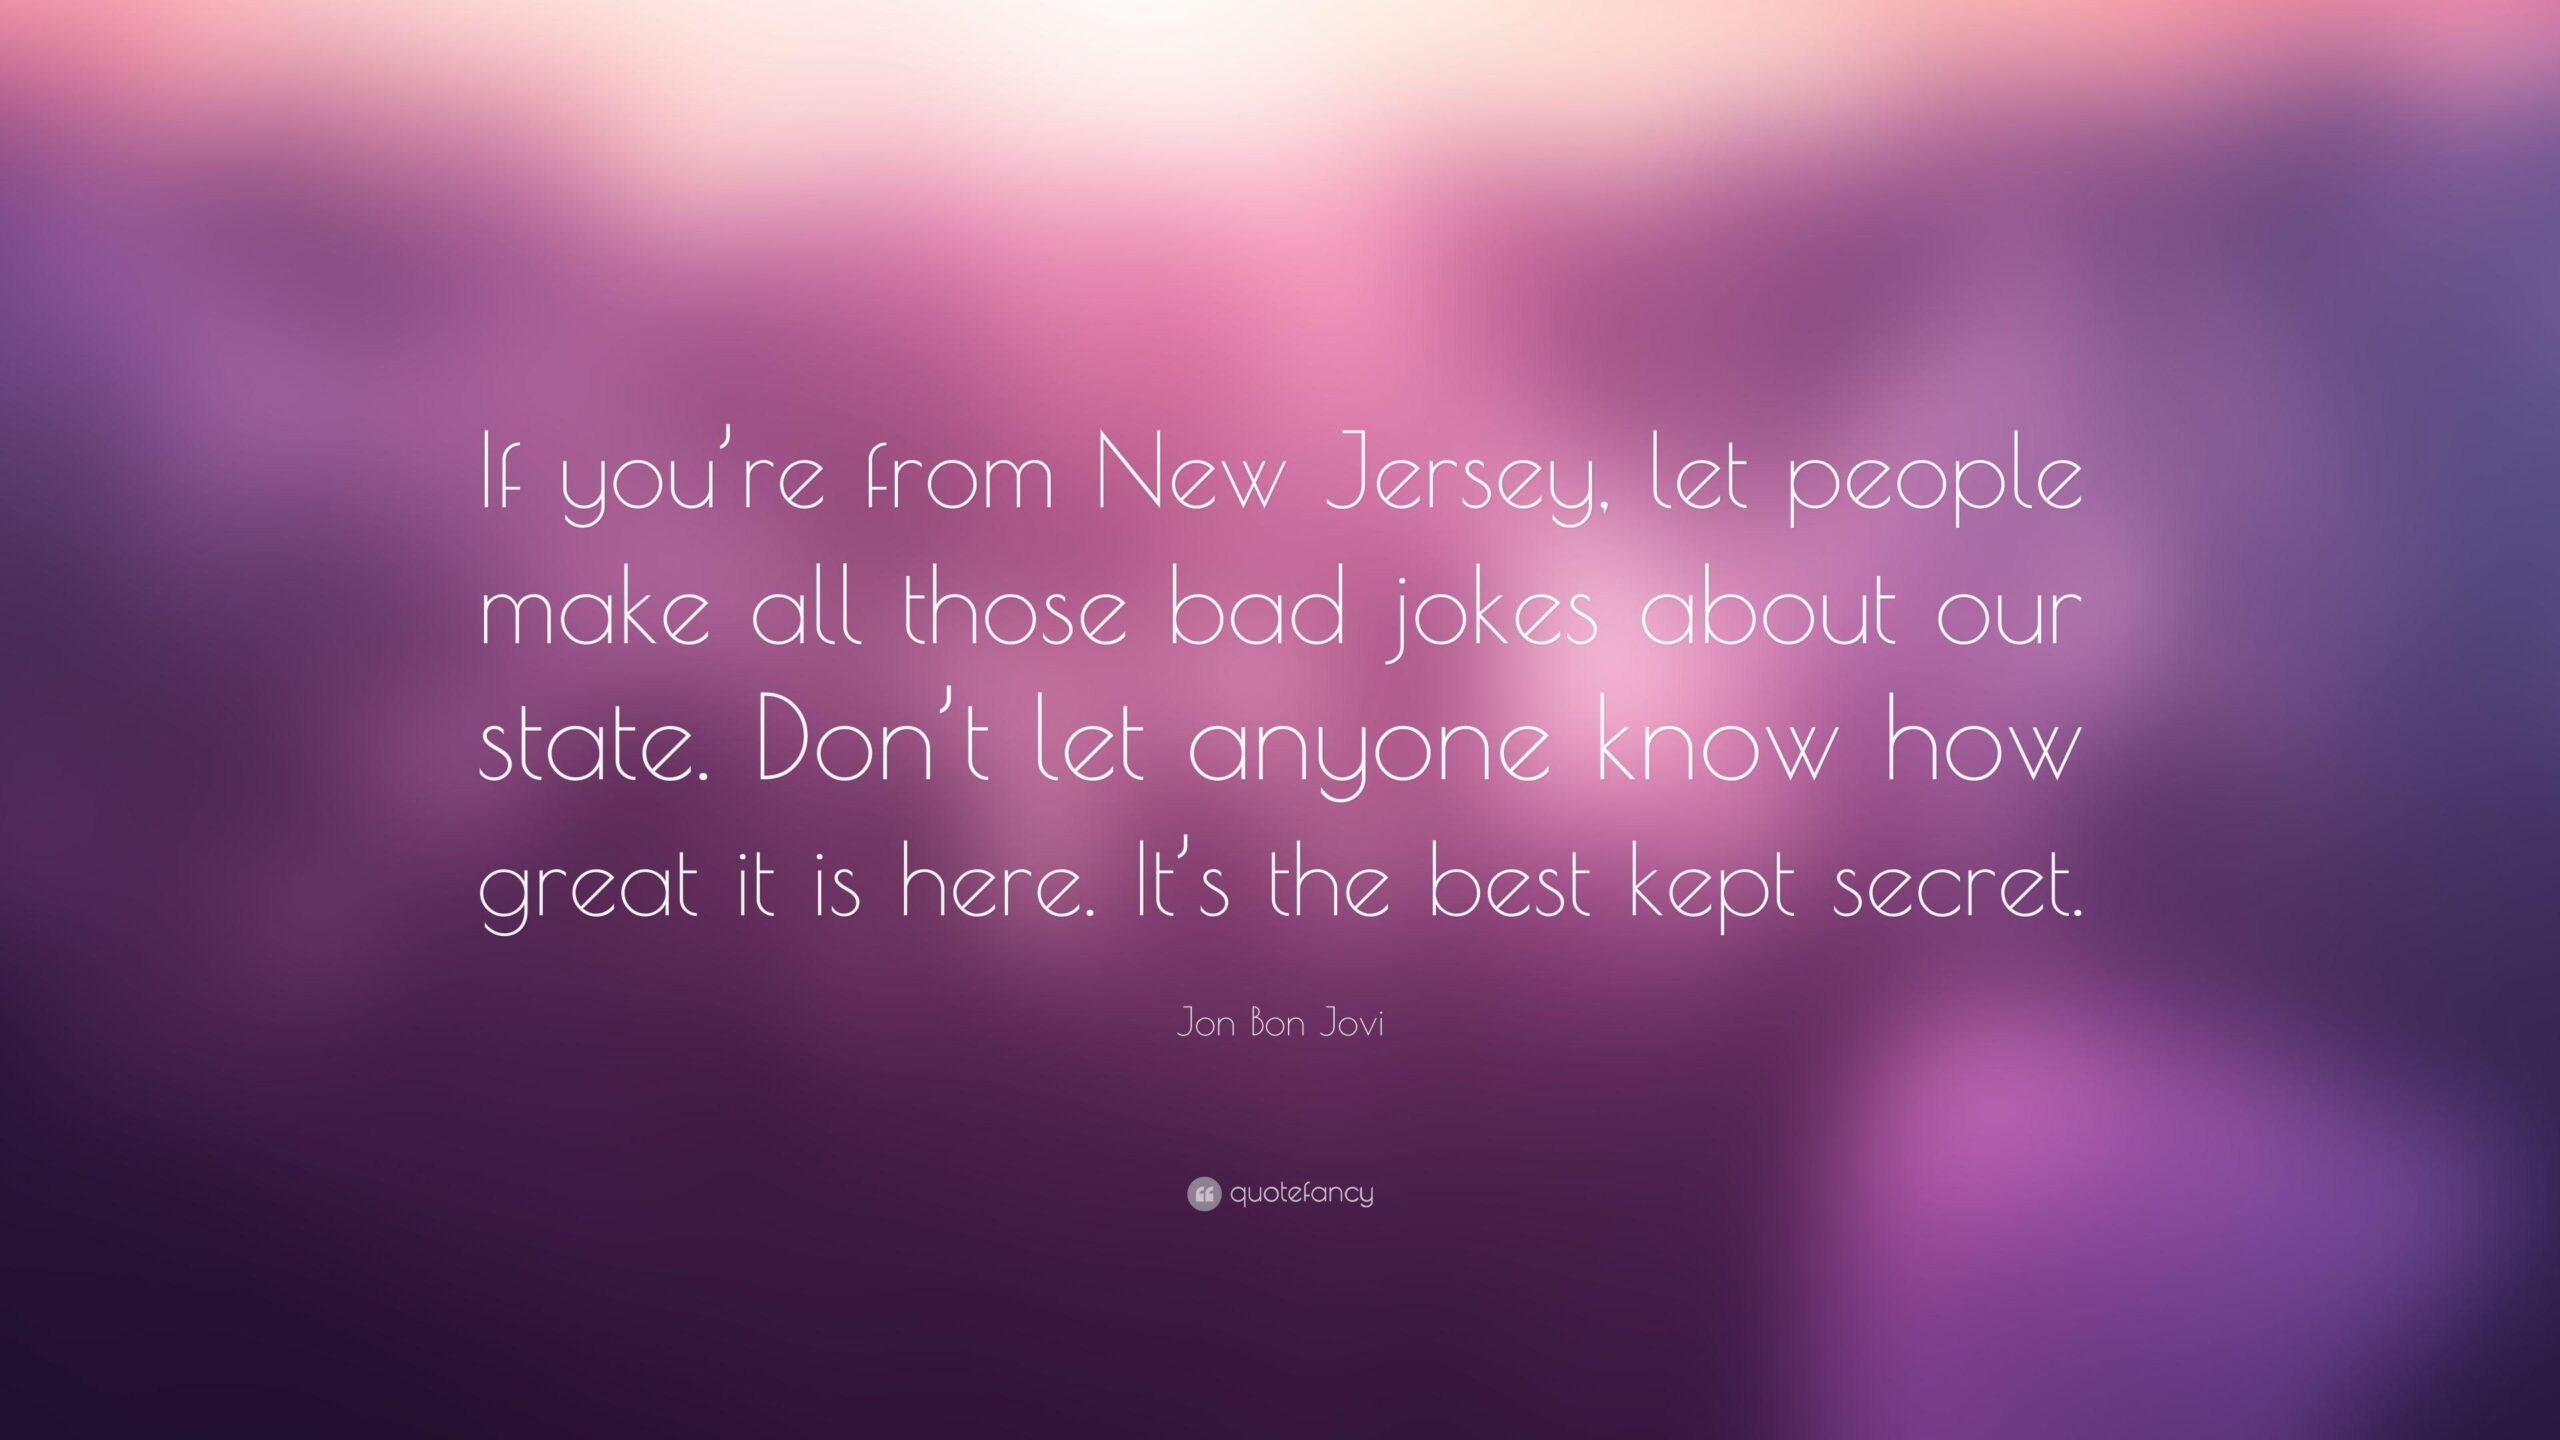 Jon Bon Jovi Quote “If you’re from New Jersey, let people make